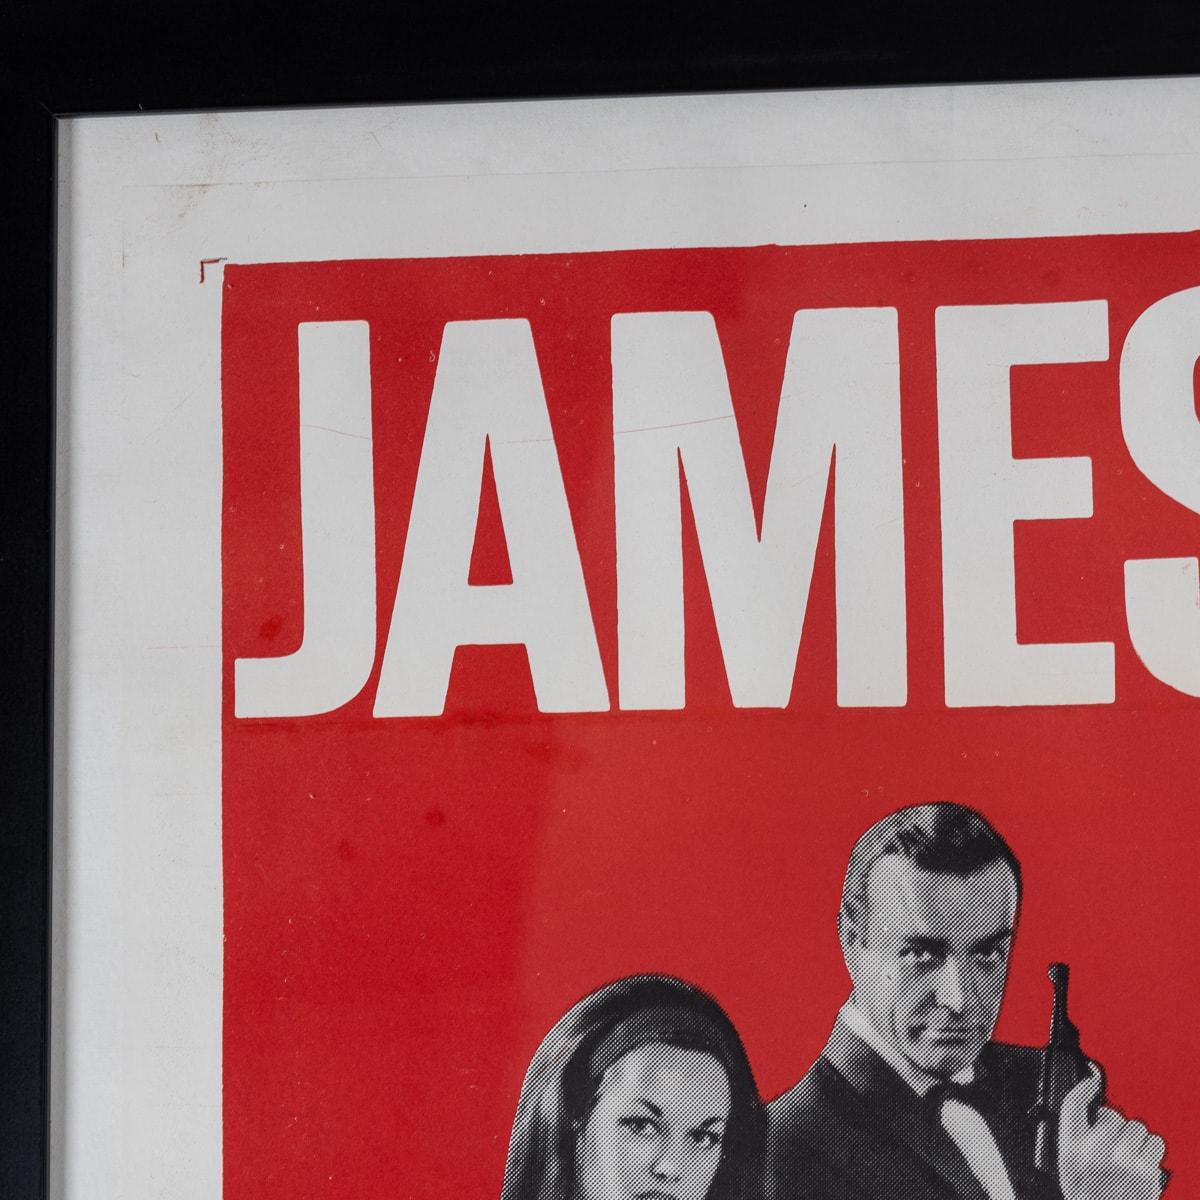 A very rare and original American (U.S) release massive theater poster from the 1963 'From Russia With Love'. A 1963 spy film and the second in the James Bond series produced by Eon Productions, as well as Sean Connery's second role as MI6 agent